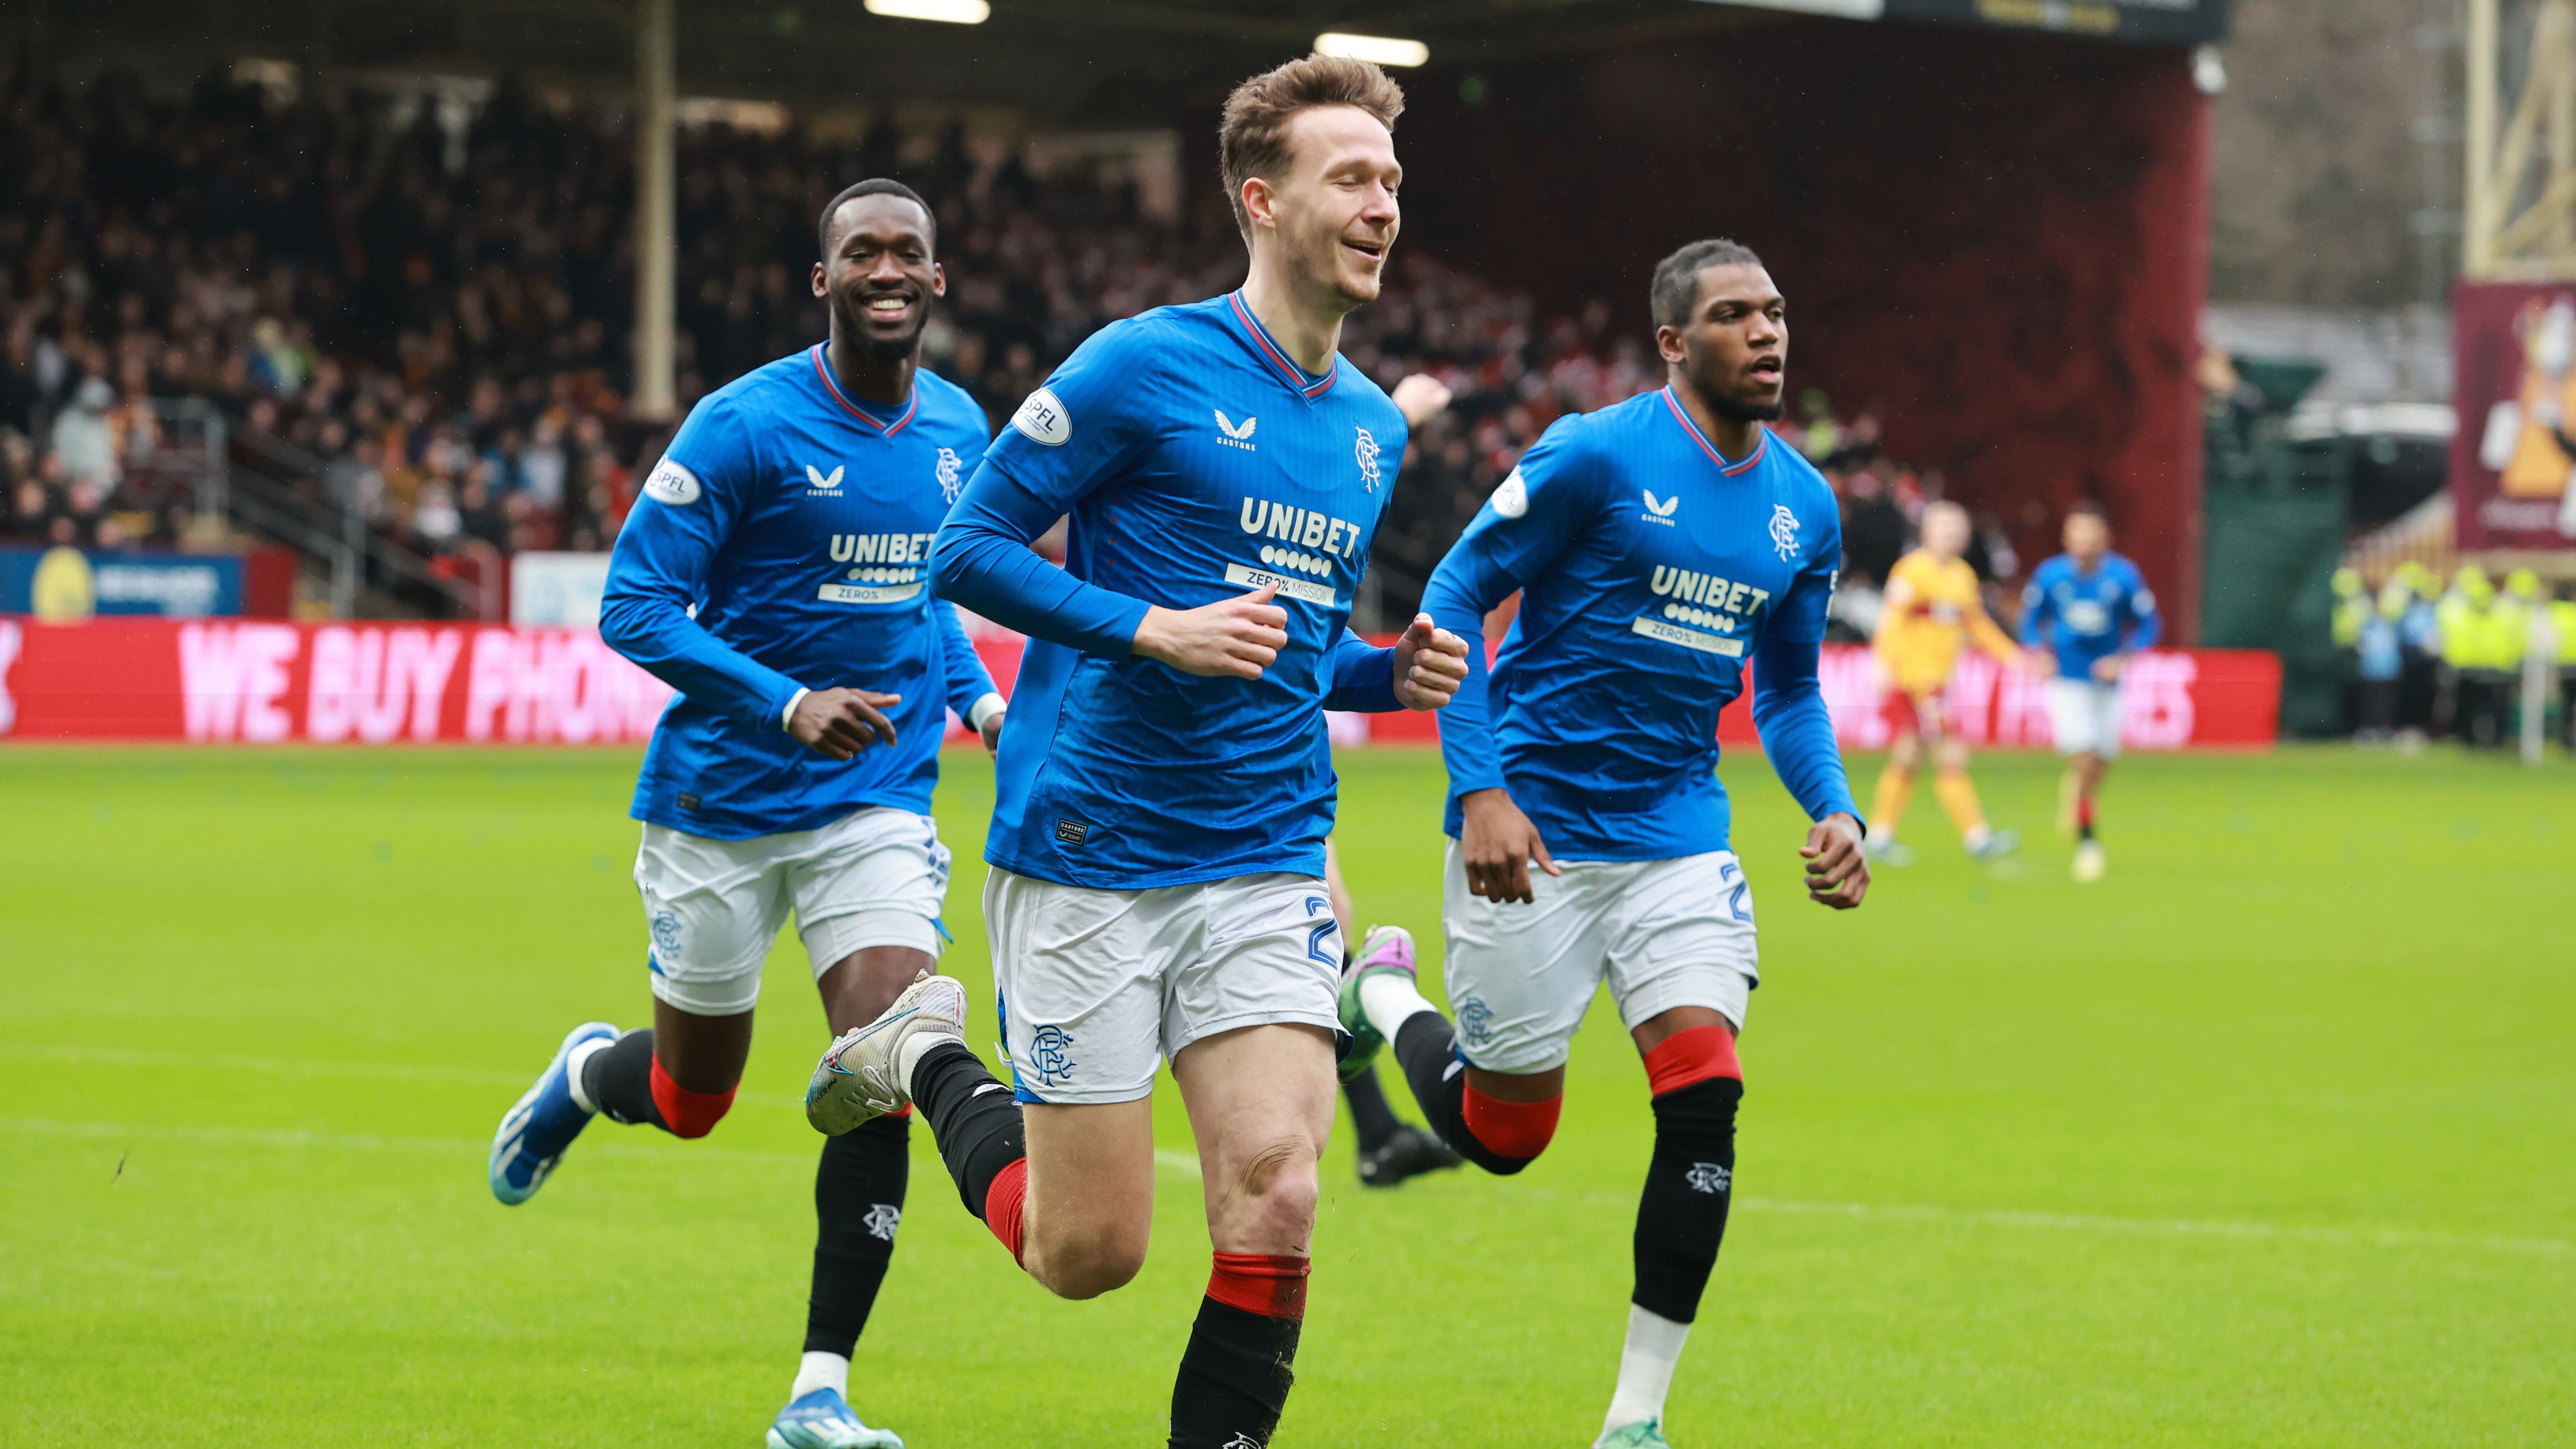 Kieran Dowell on target as Rangers beat Motherwell in wet-and-wild encounter